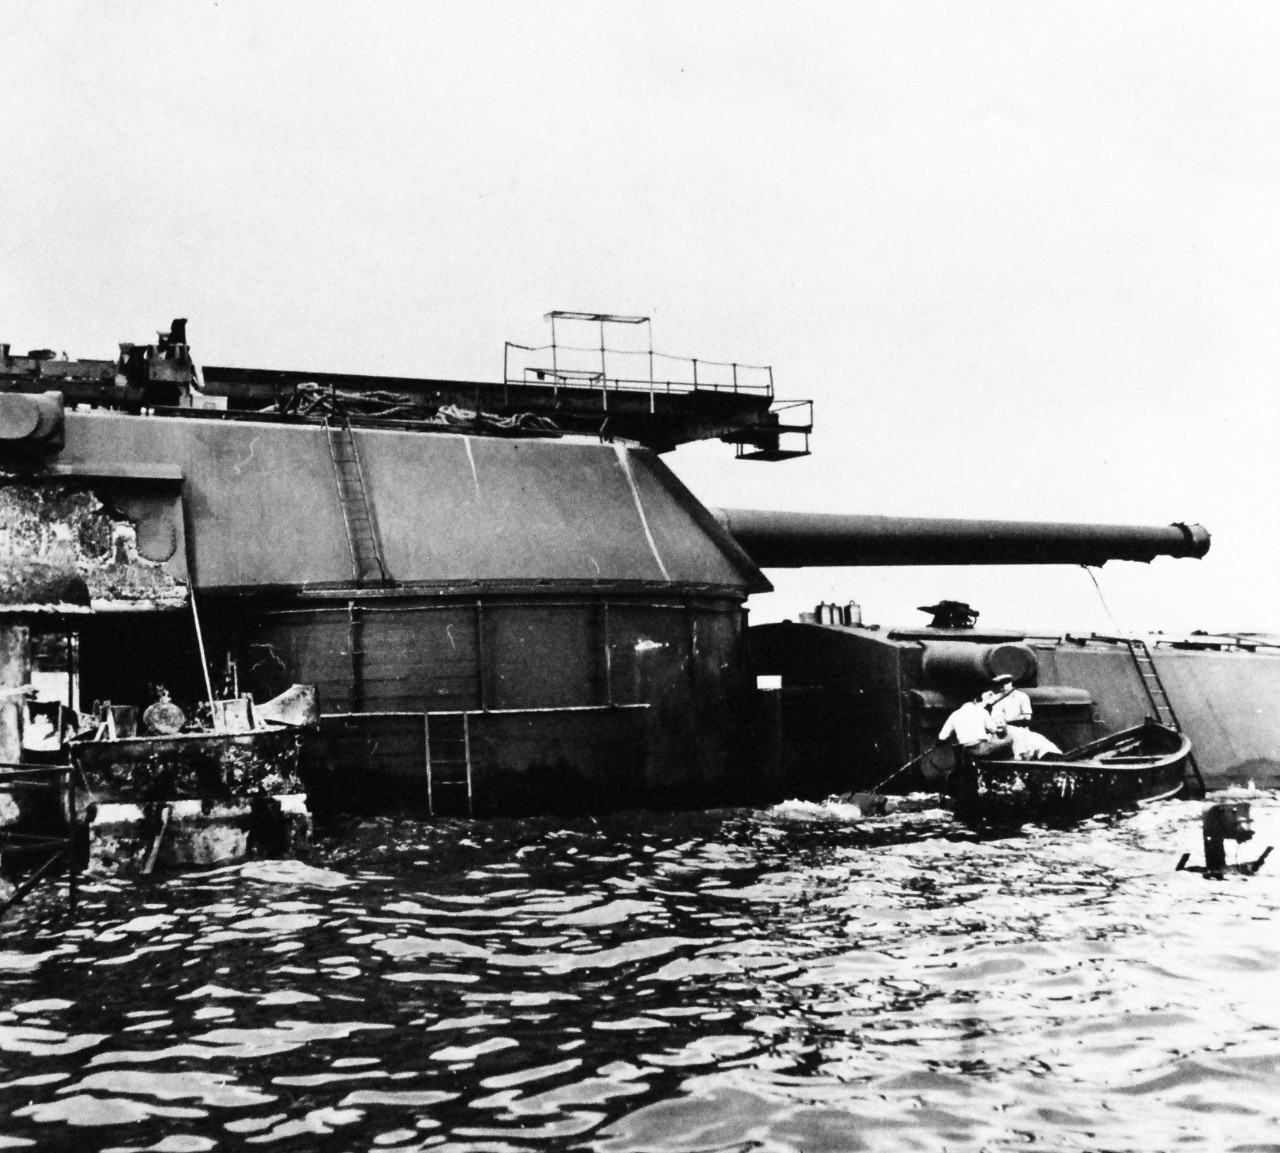 <p>80-CF-1061-3: Divers working around aft turrets of USS Arizona (BB 39), sunk during the Japanese attack on Pearl Harbor, Territory of Hawaii, on 7 December 1941. . Official U.S. Navy Photograph, now in the collections of the National Archives. (9/16/2014).</p>
